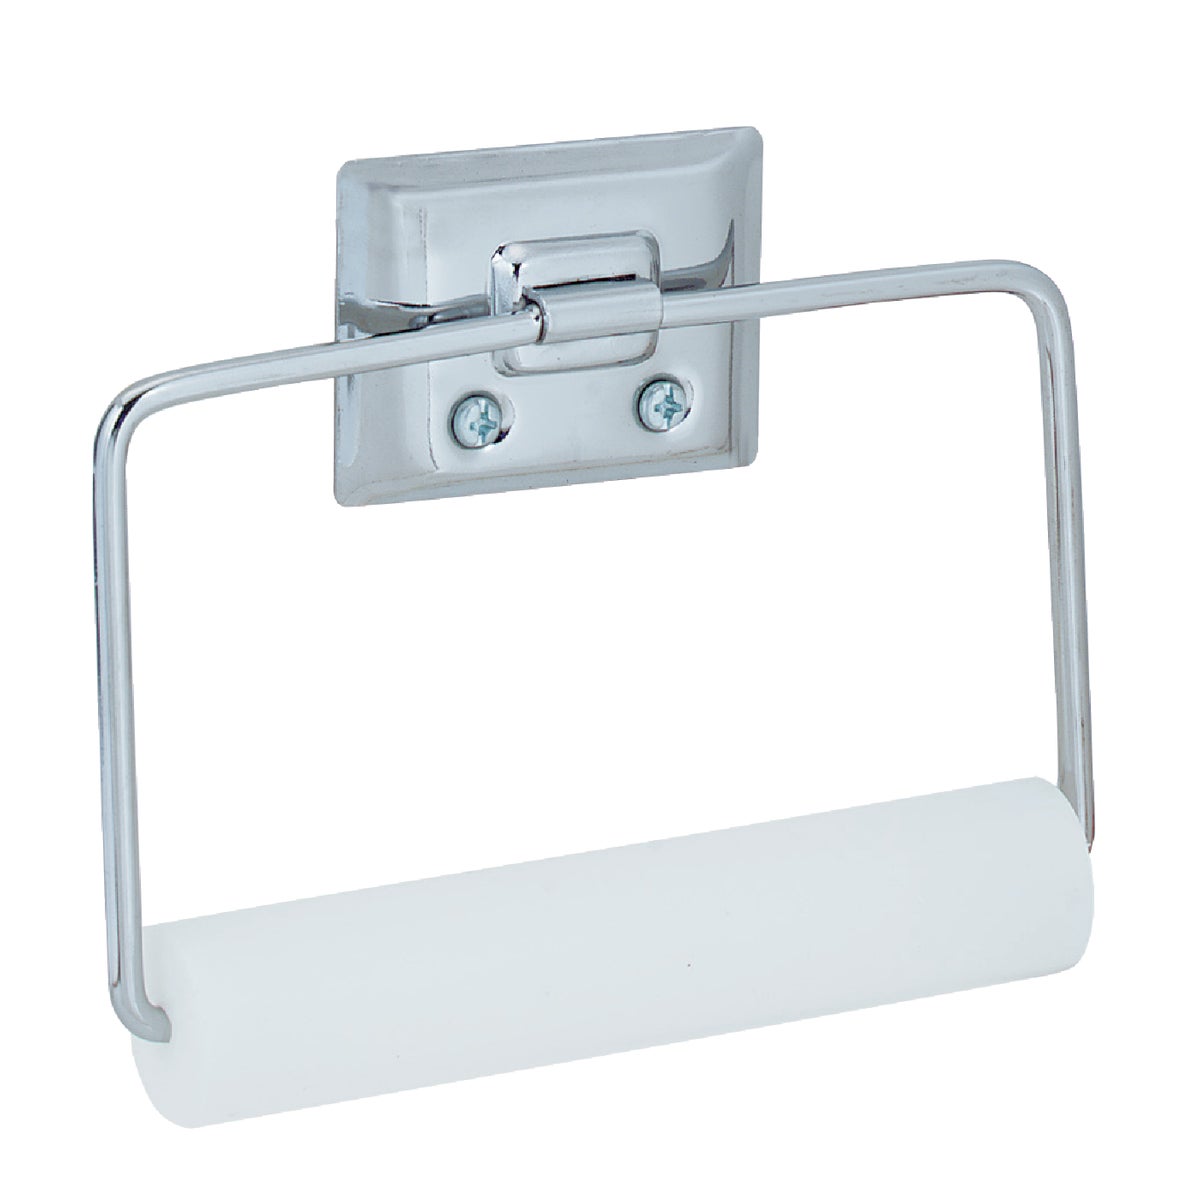 Item 427050, Swing-type frame with 1-piece plastic roller. Easy-to-install.